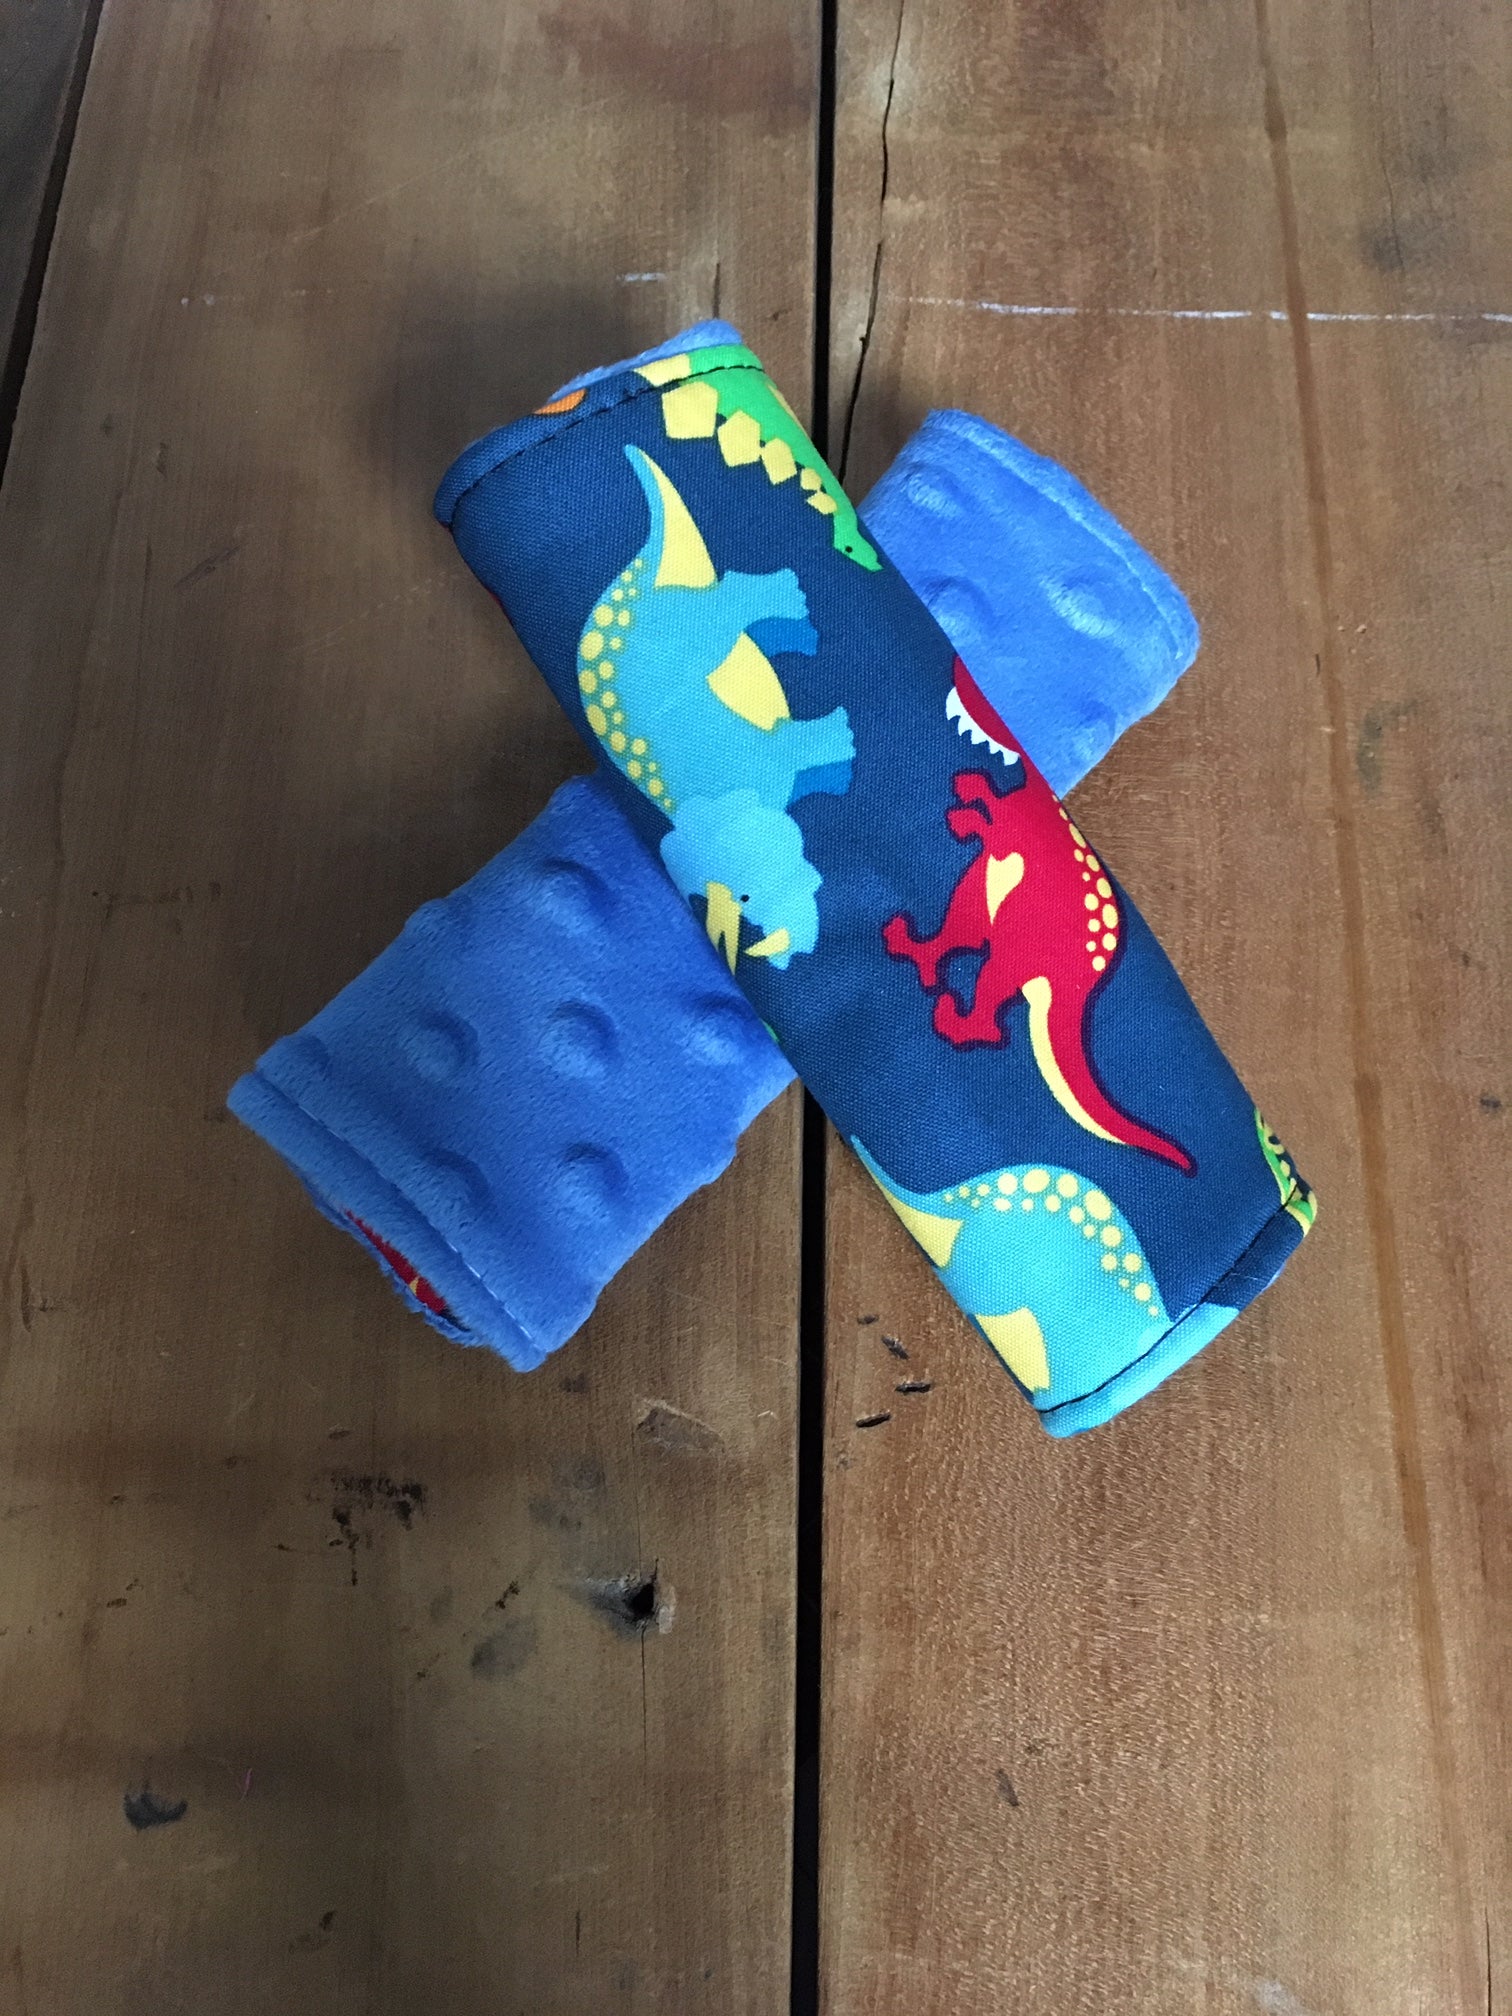 navy dinosaur car seat strap covers - dinosaurs in light blue, orange, red and green shown in 6" size shown with blue minky